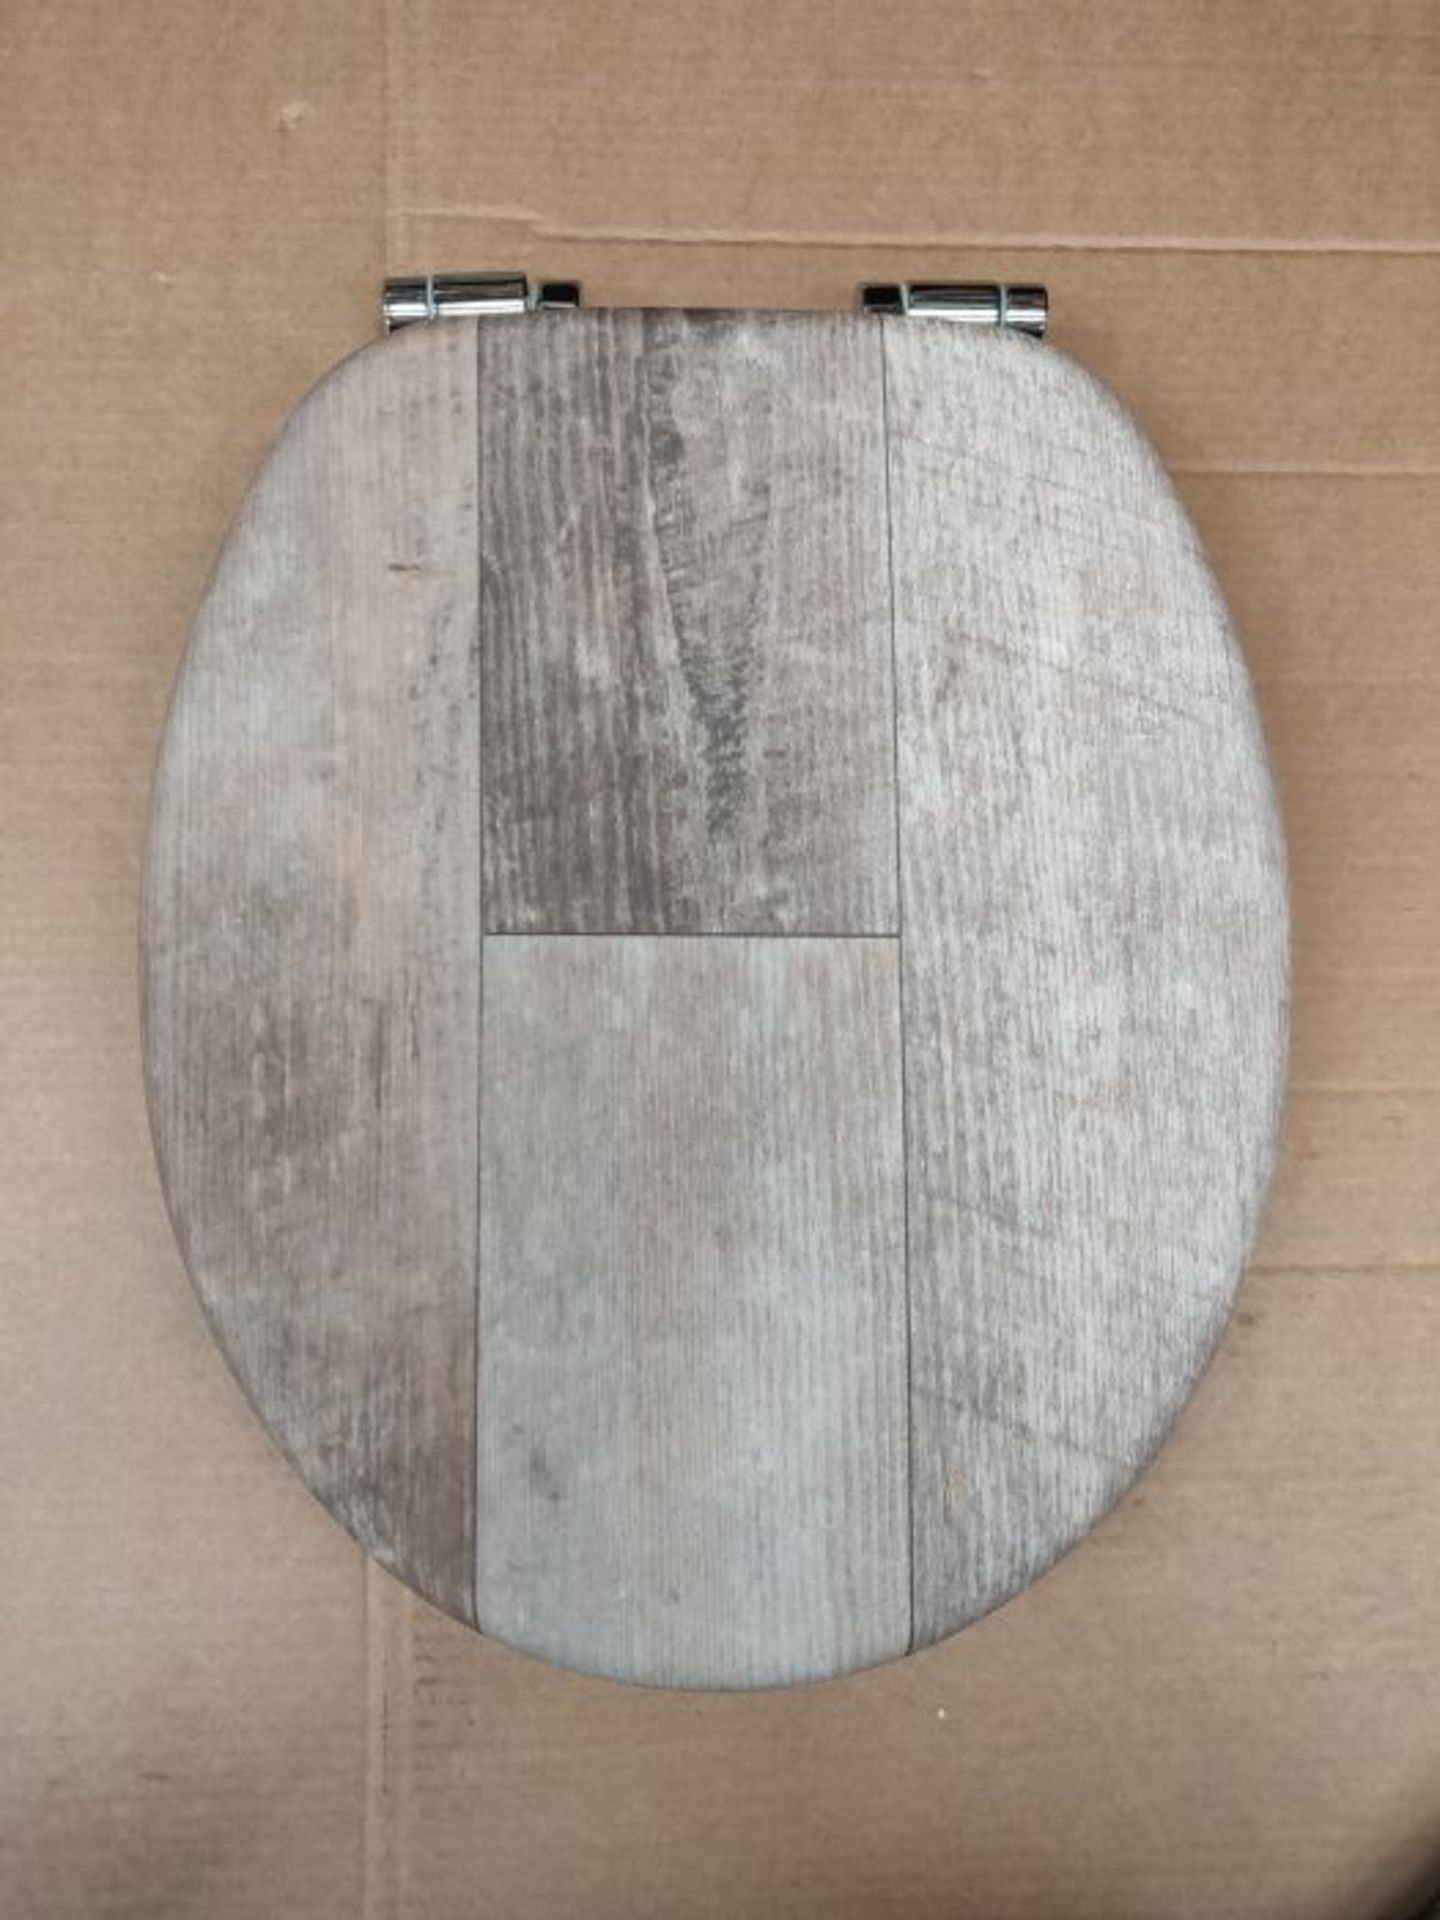 [CRACKED] Tiger Old Wood Toilet Seat, Stainless Steel, MDF, Rubber, Brown, 37.7 x 5.5 - Image 3 of 3